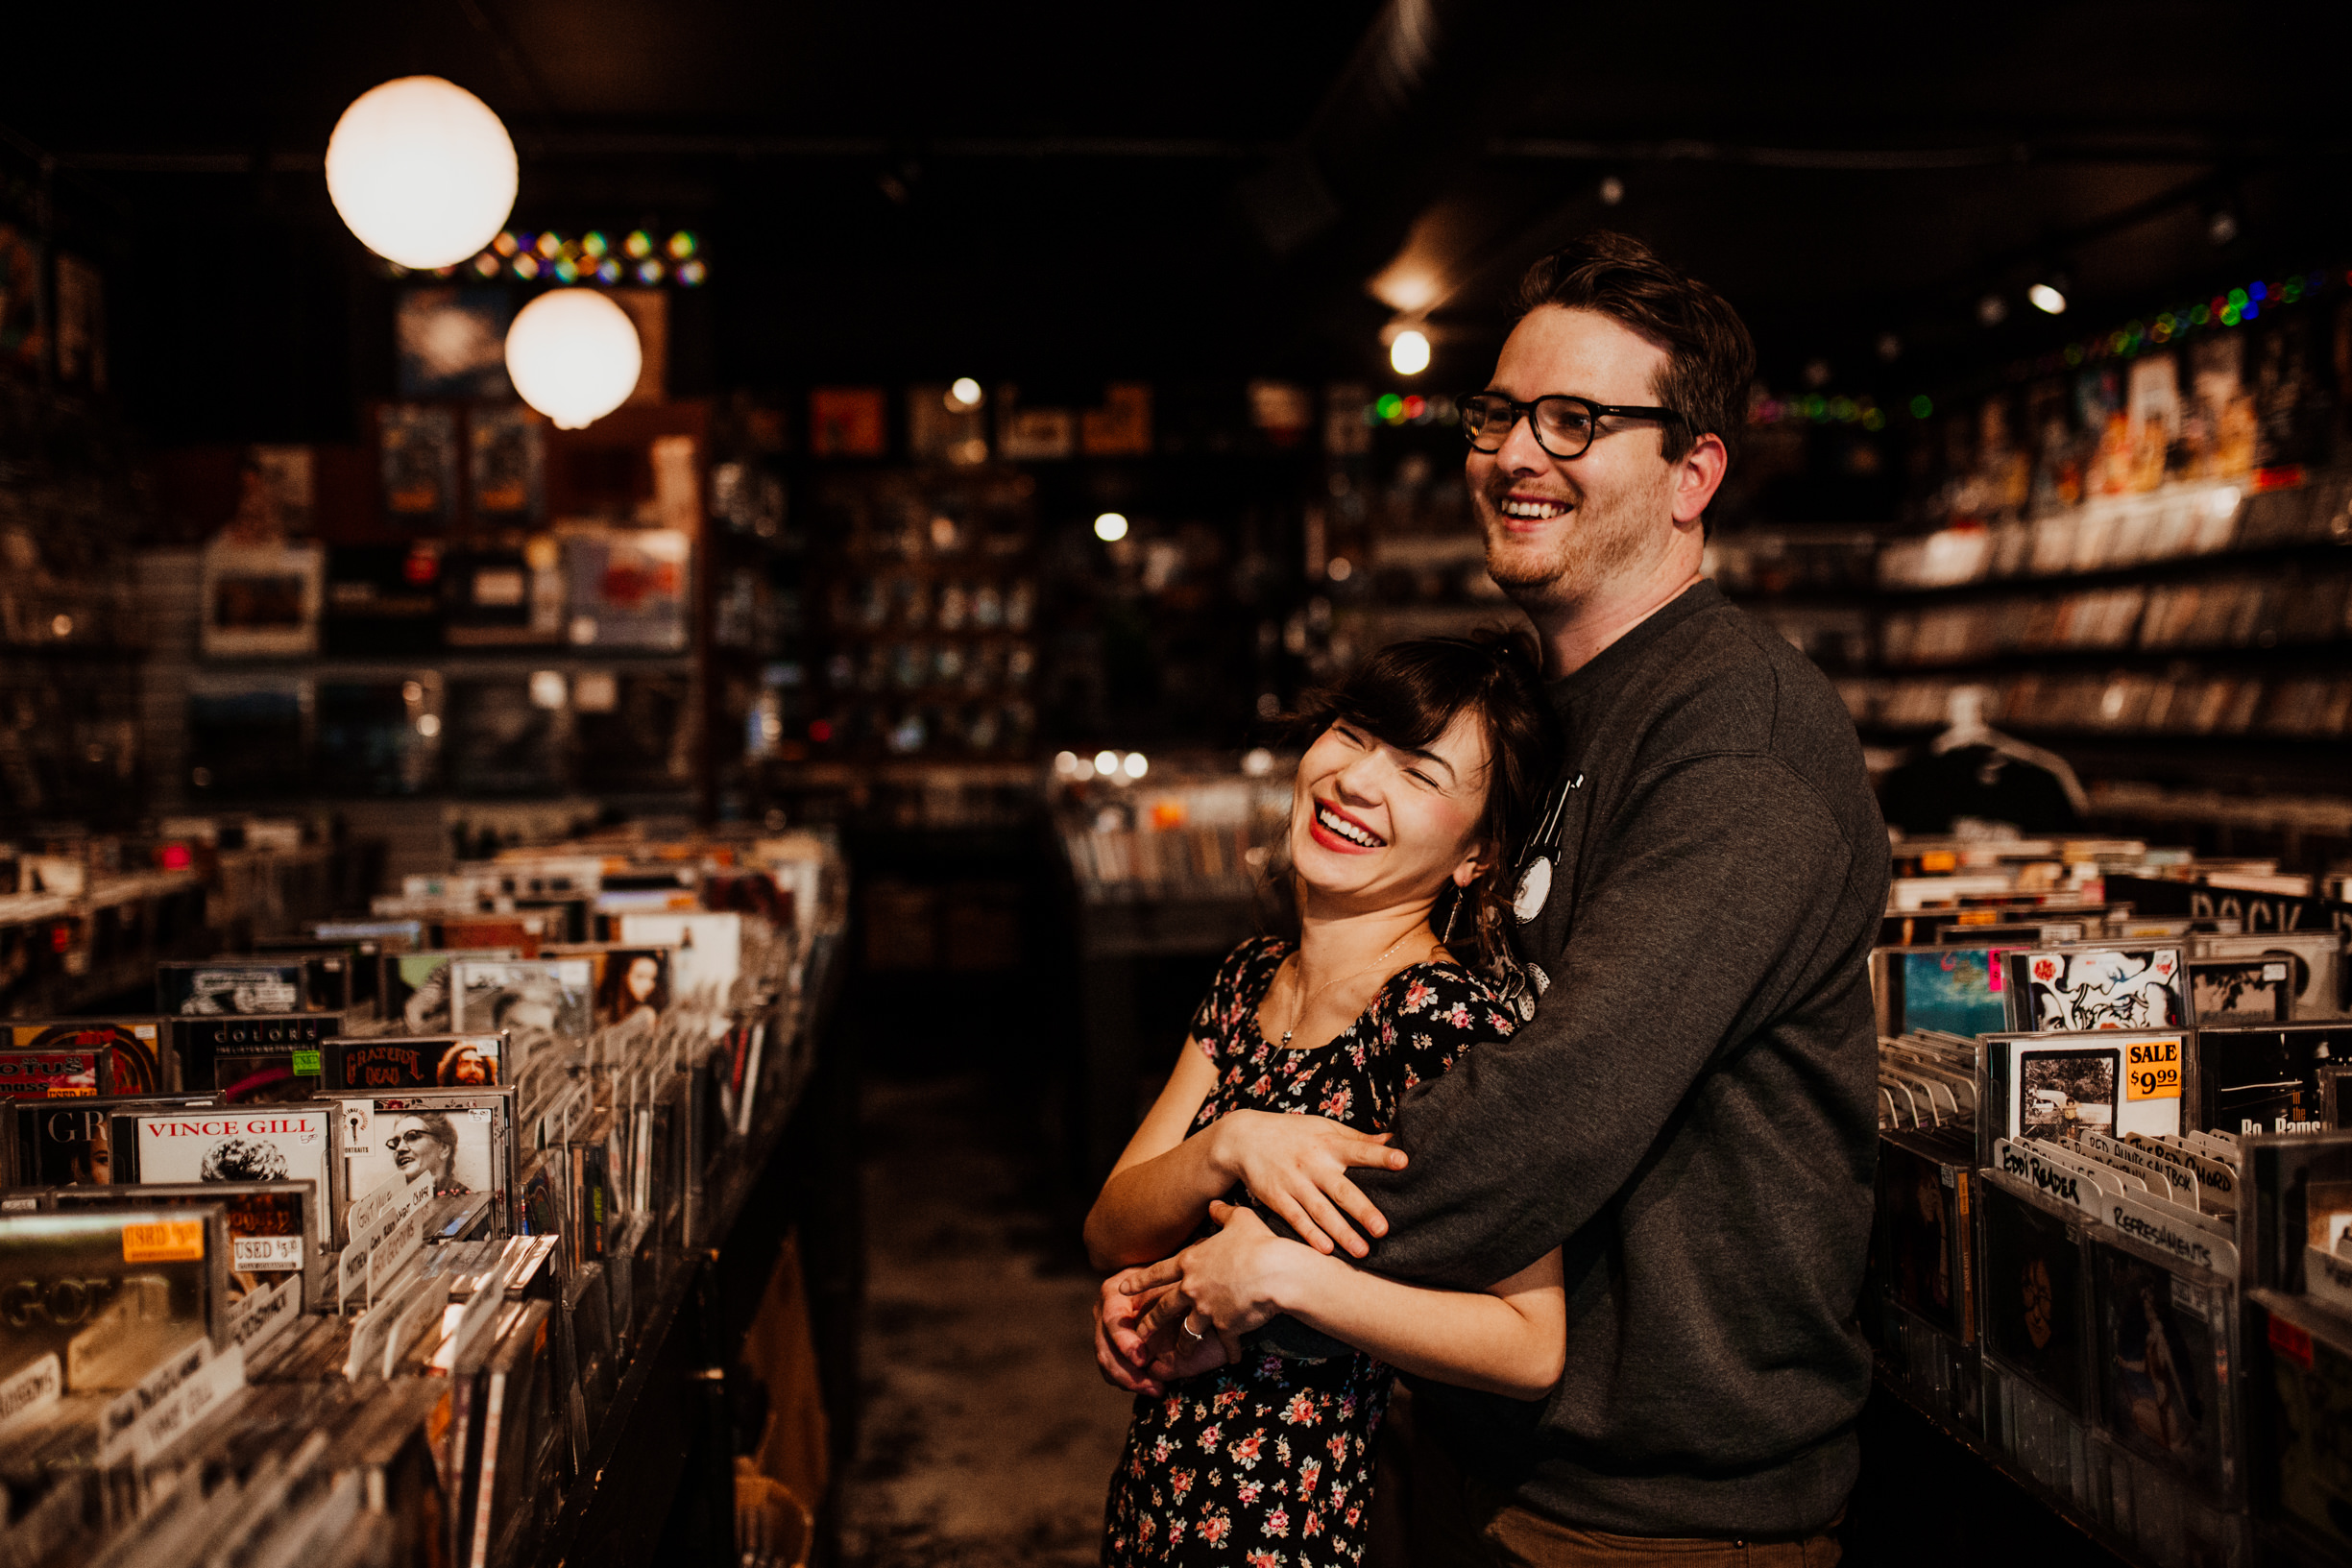 louisville-engagement-photographer-record-store-in-home-session-crystal-ludwick-photo (34 of 53).jpg